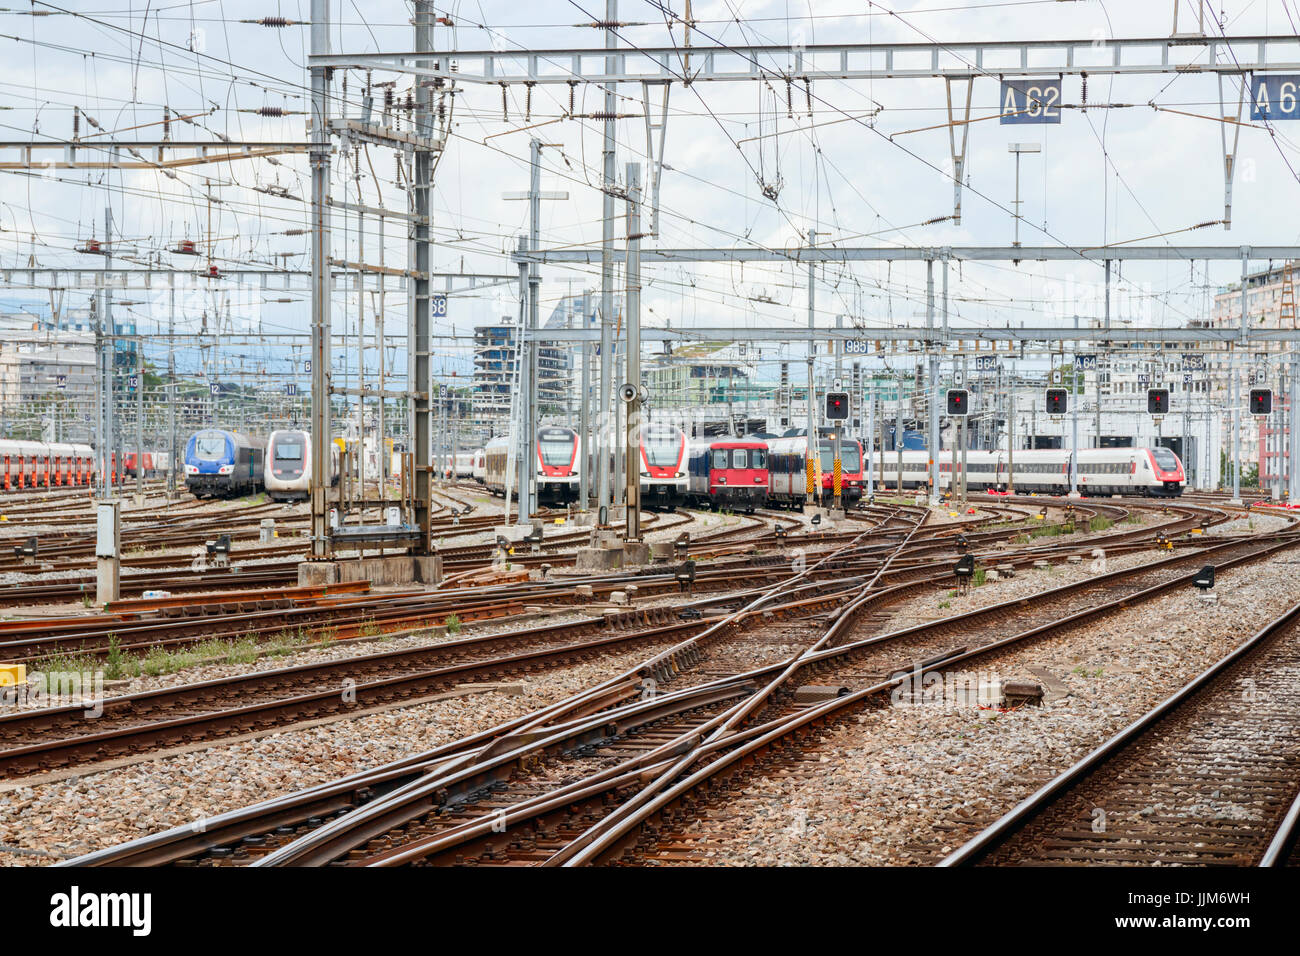 Rail yard with trains and overhead lines of Genève-Cornavin railway station under a cloudy sky. Geneva, Switzerland. Stock Photo